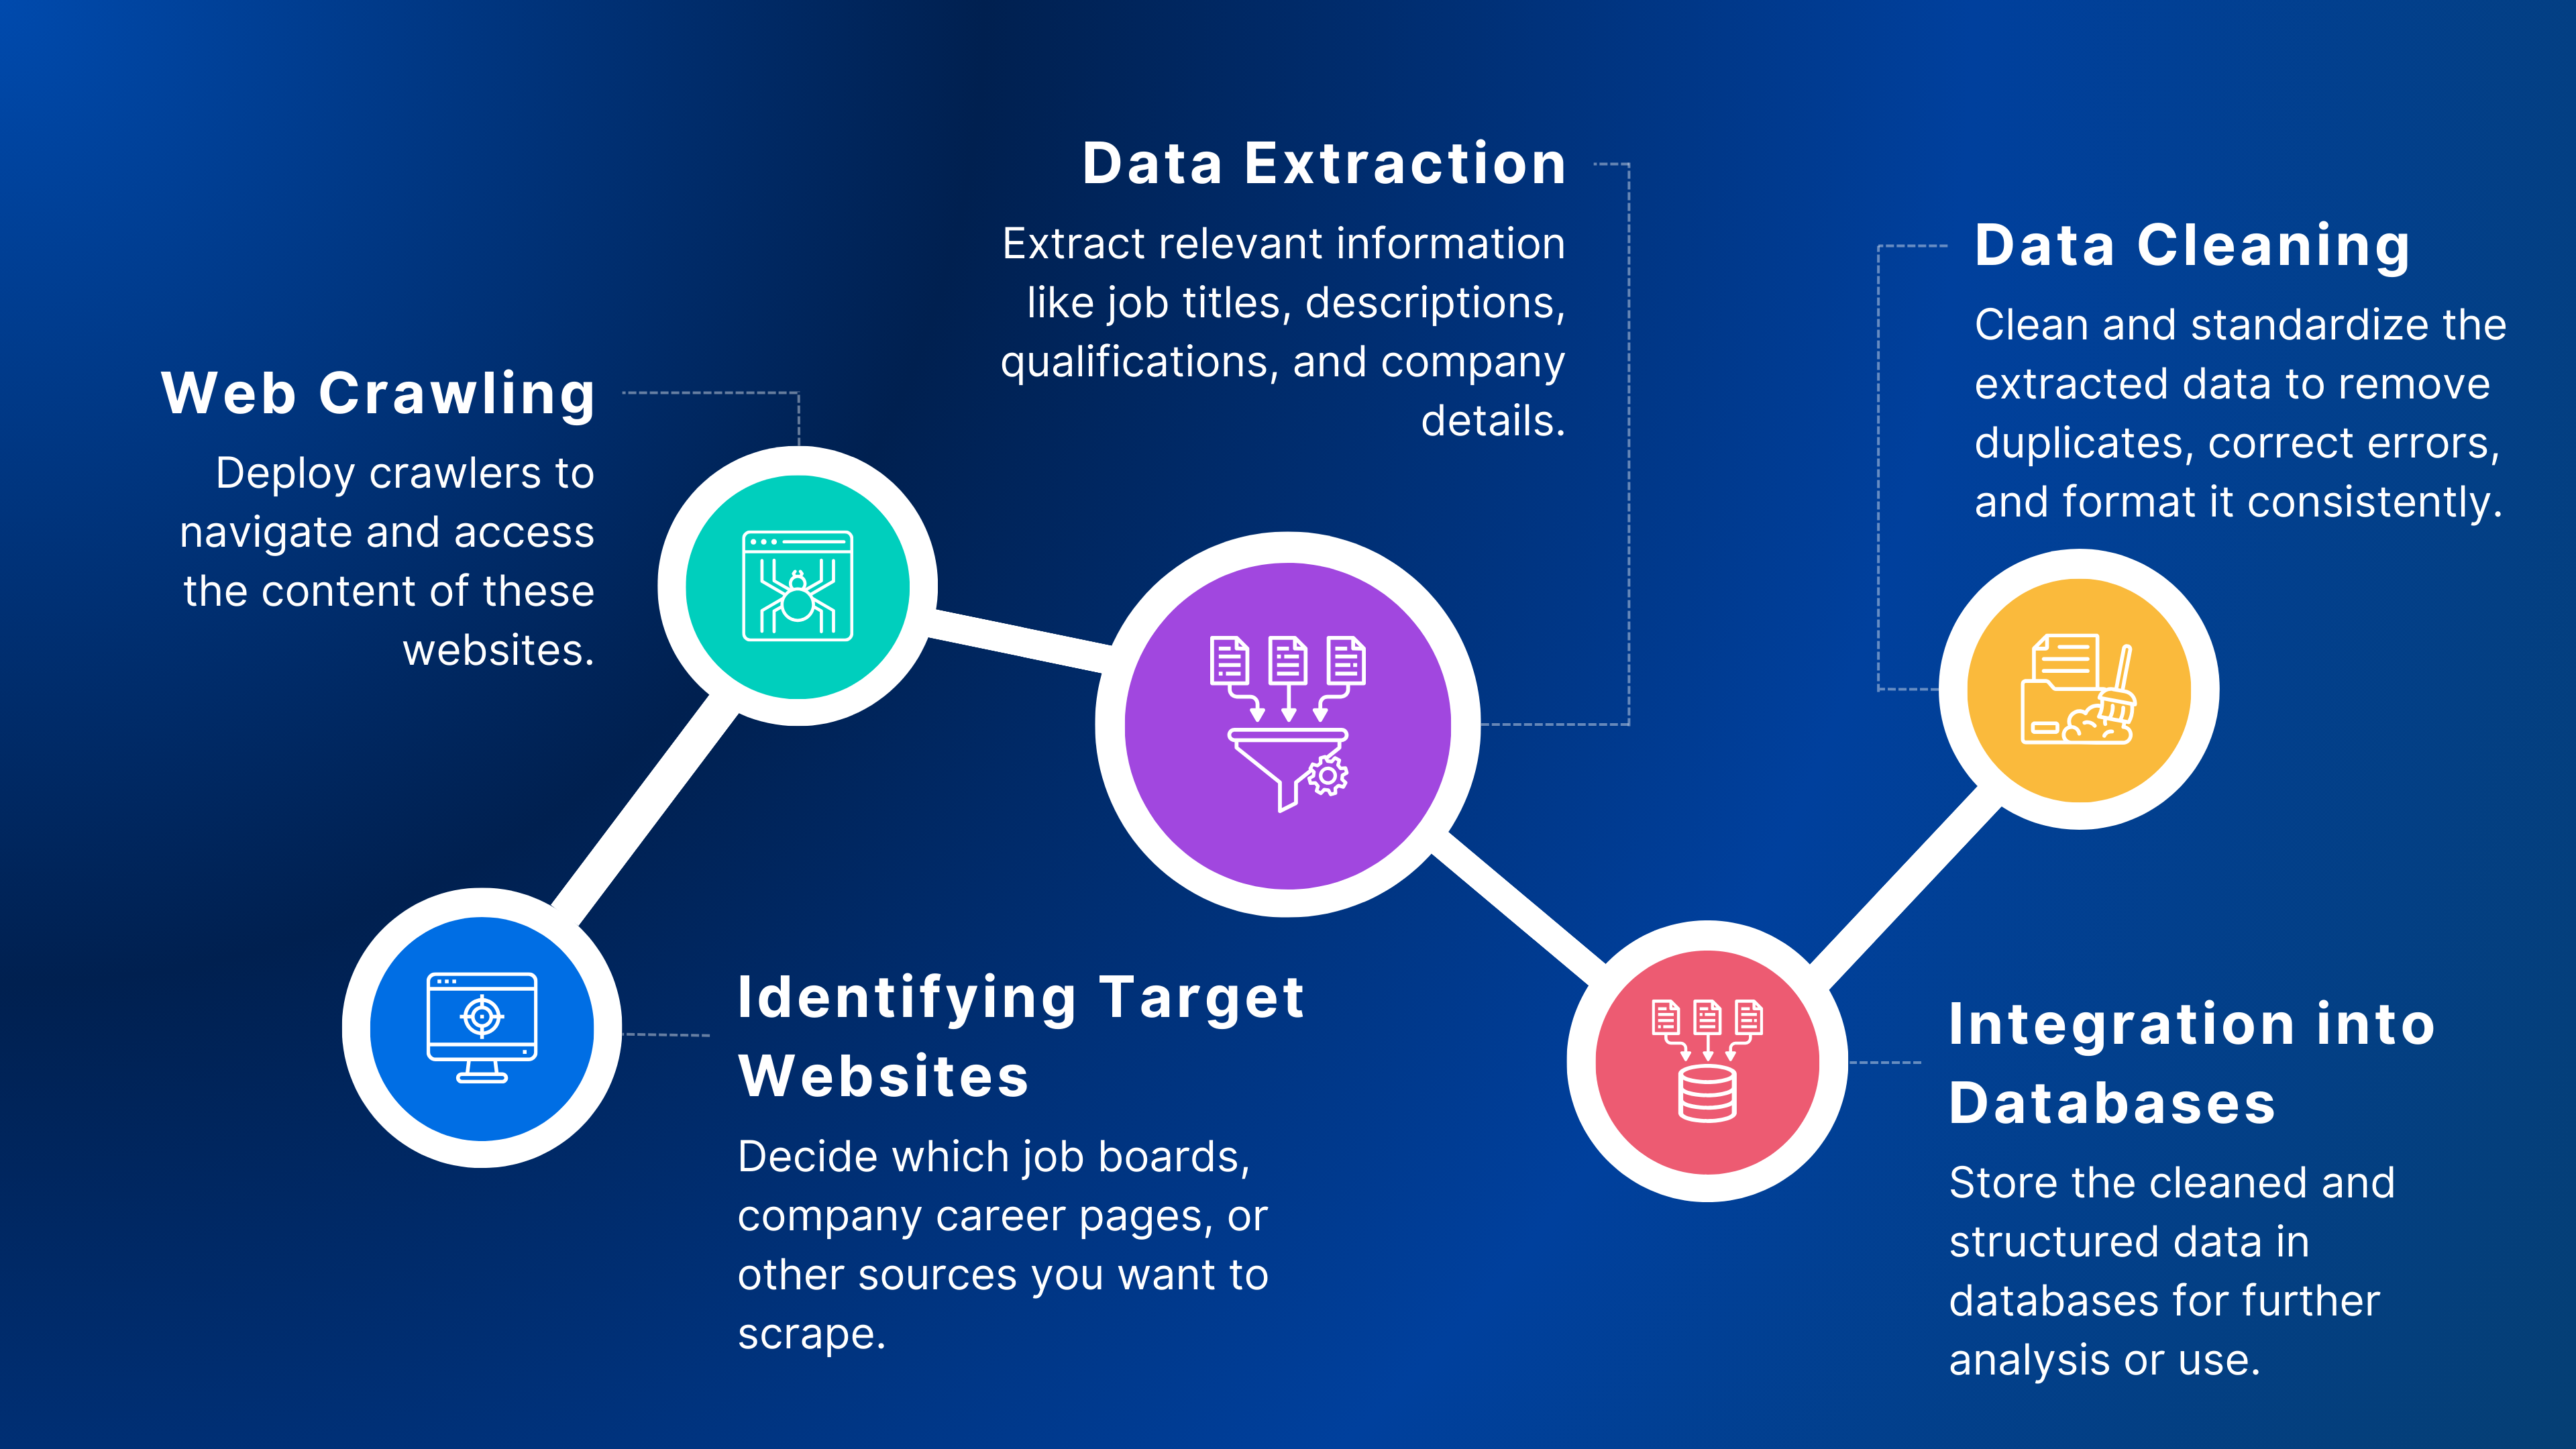 Flowchart of the Job Scraping Process, detailing steps from identifying target websites through web crawling, data extraction, and cleaning, to final data integration into databases.